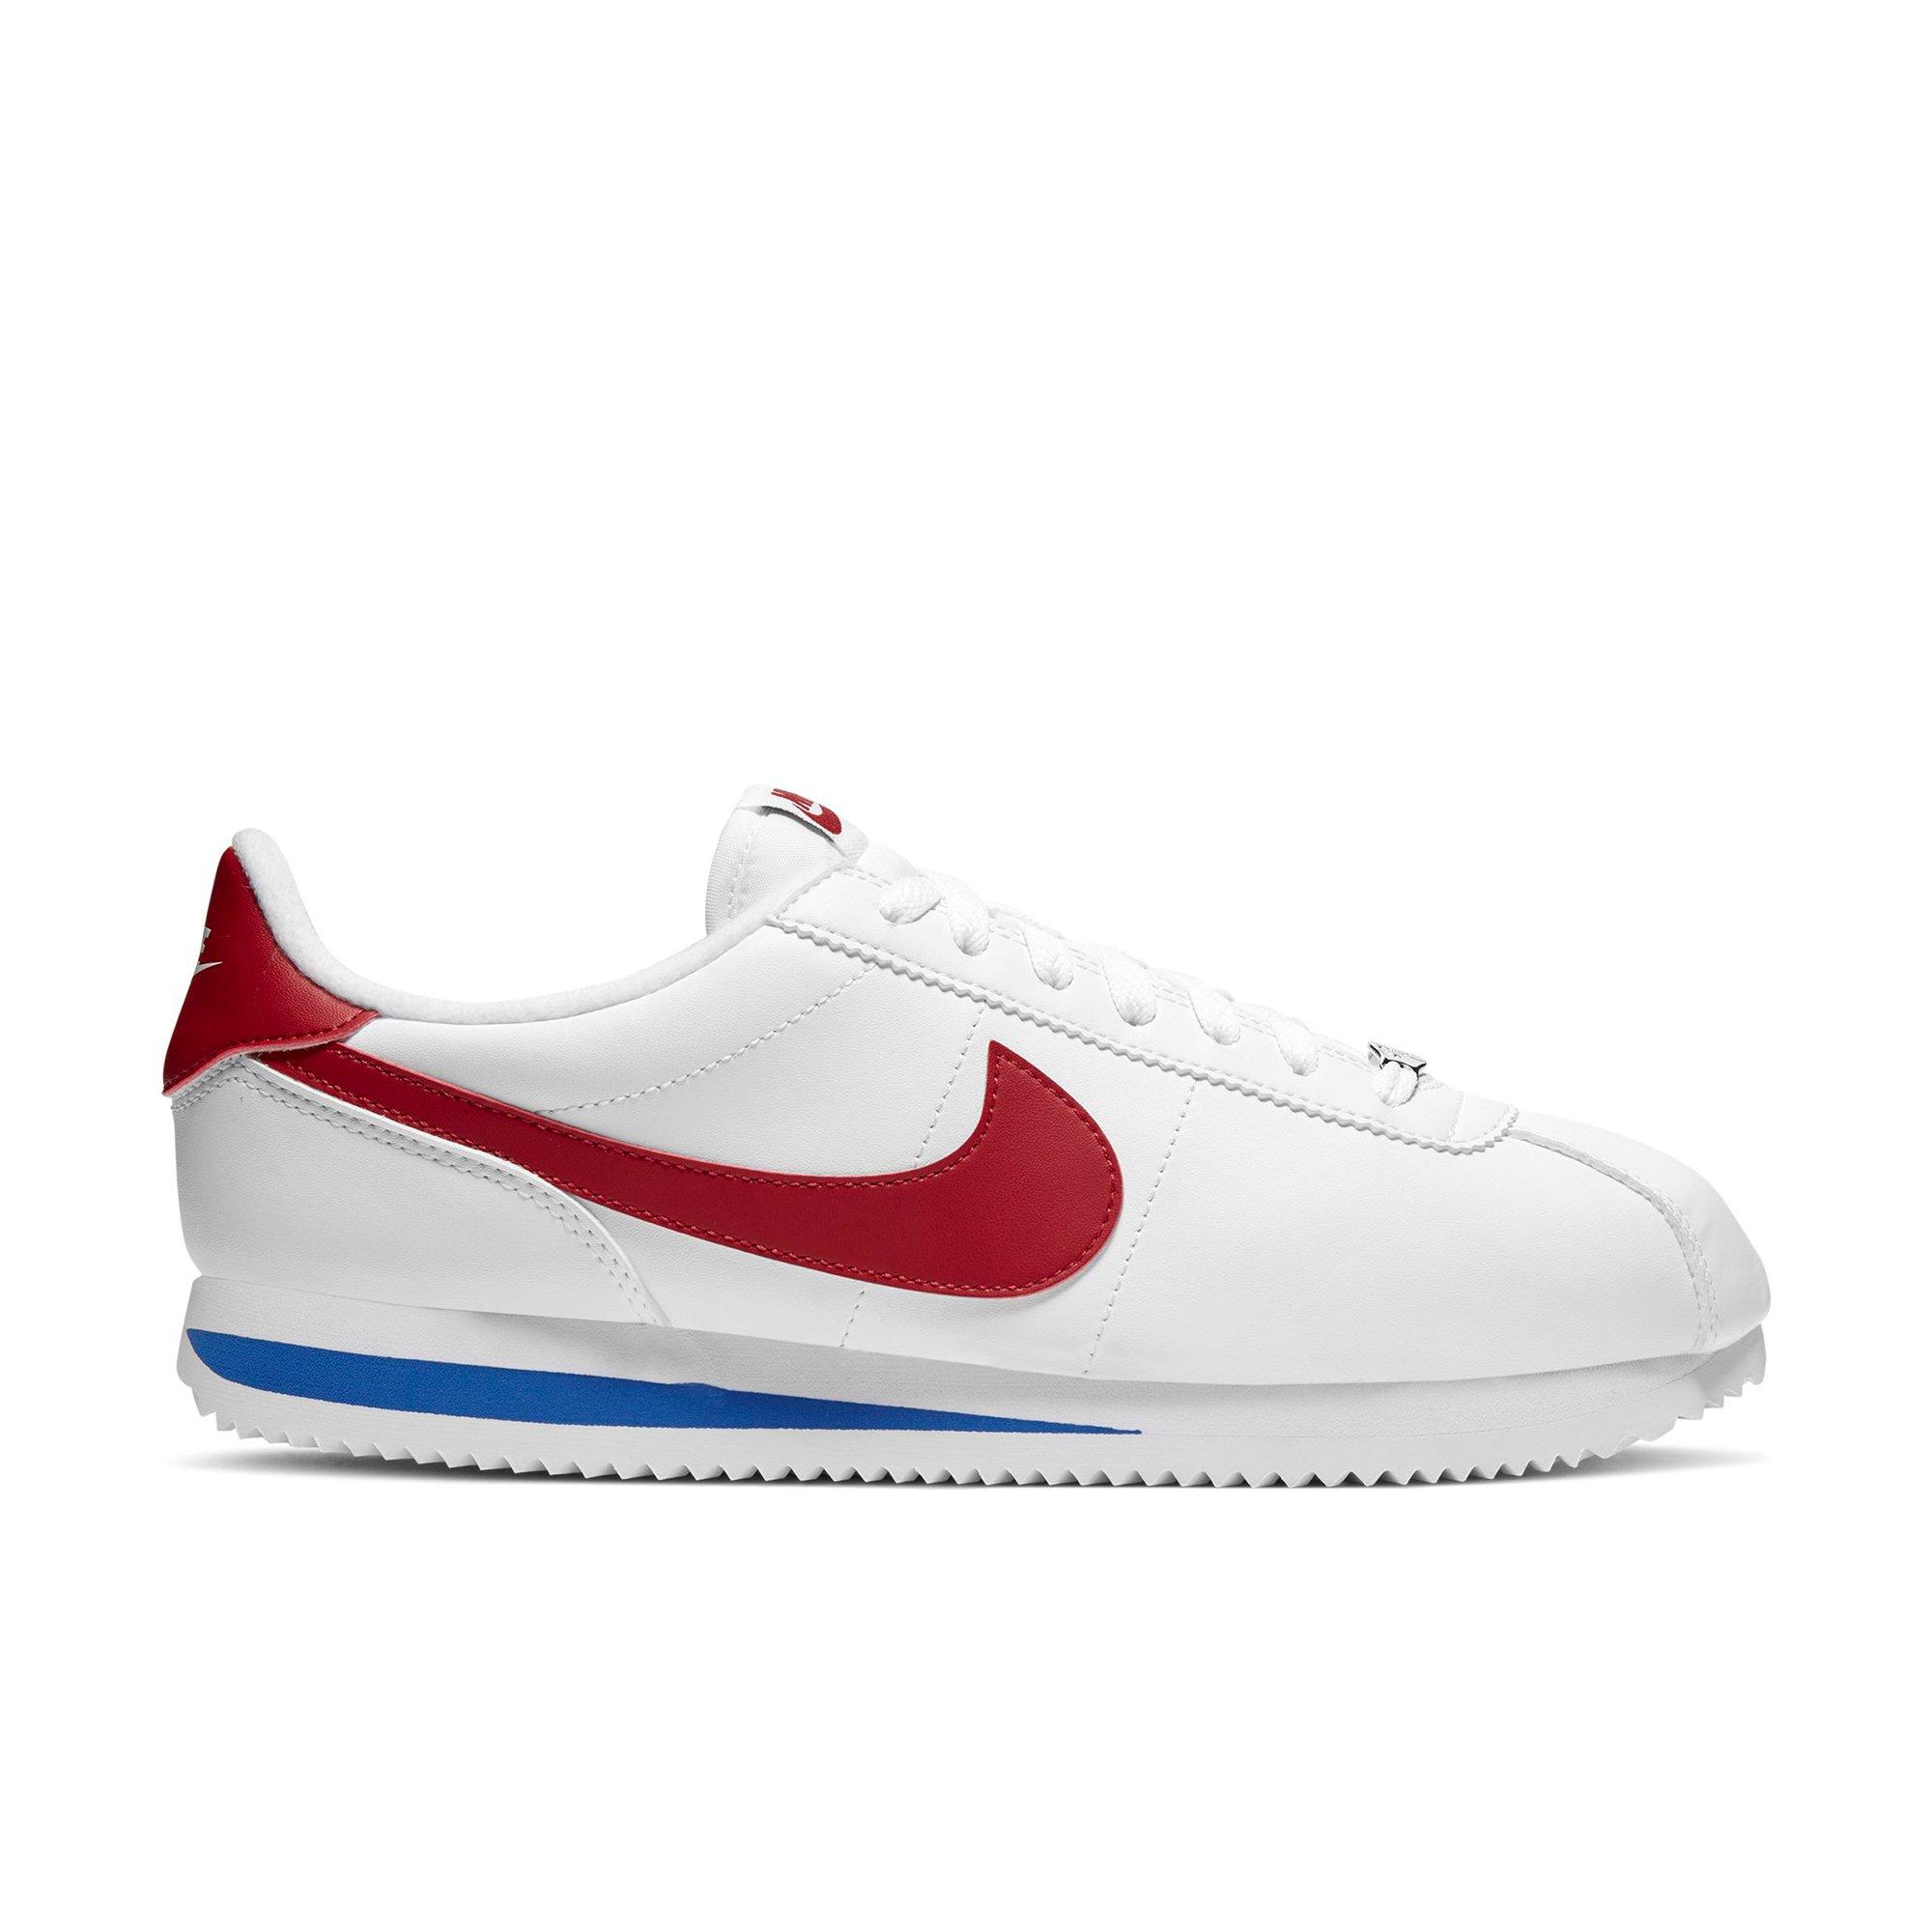 red white blue nike shoes 